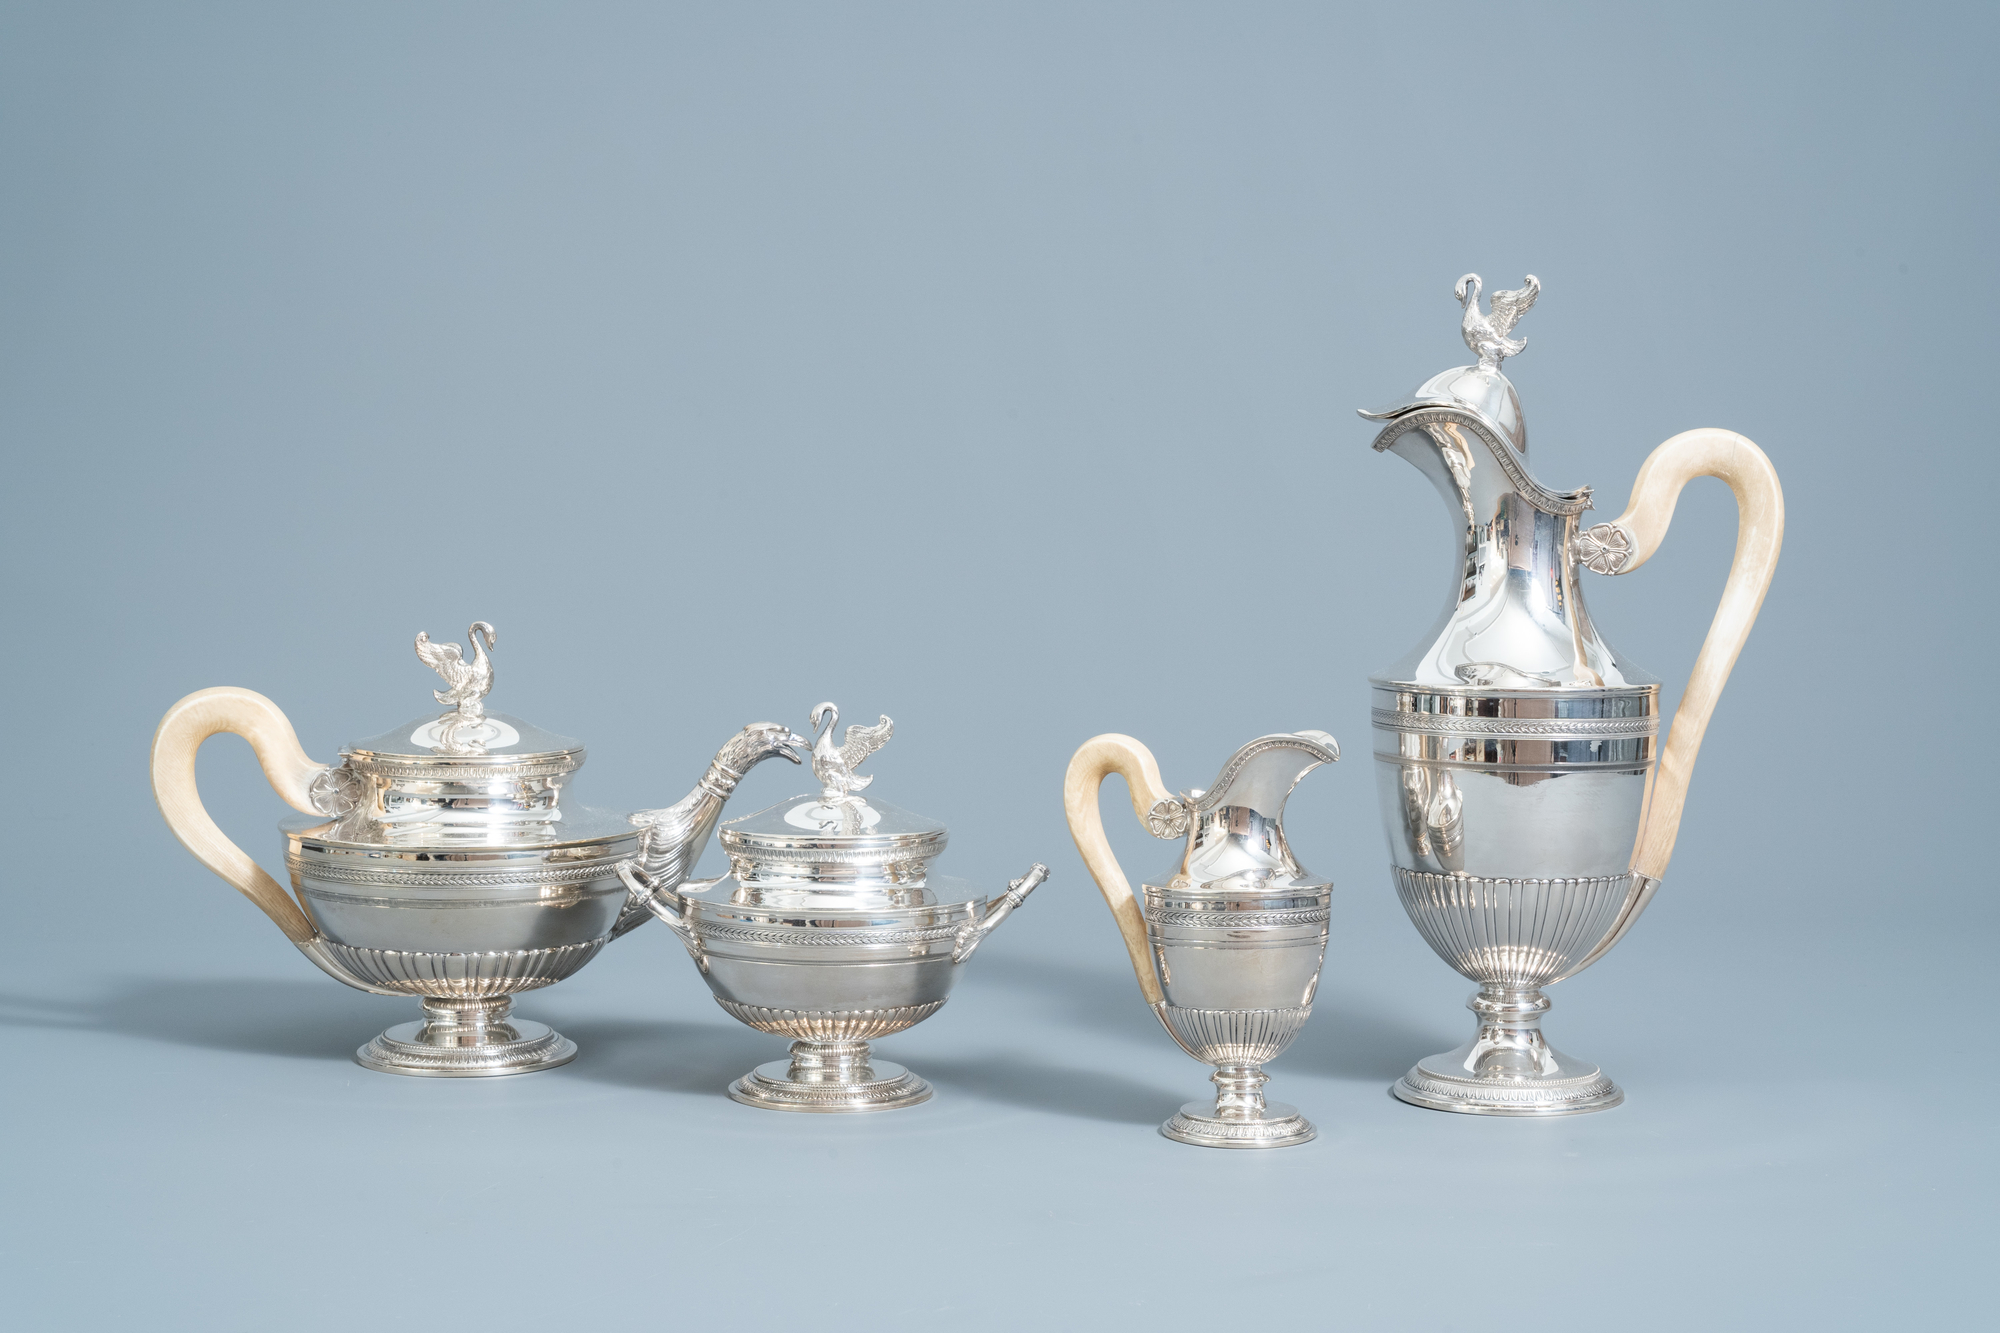 A four-piece silver Directoire style tea set with ivory handles, 800/000, 19th/20th C.